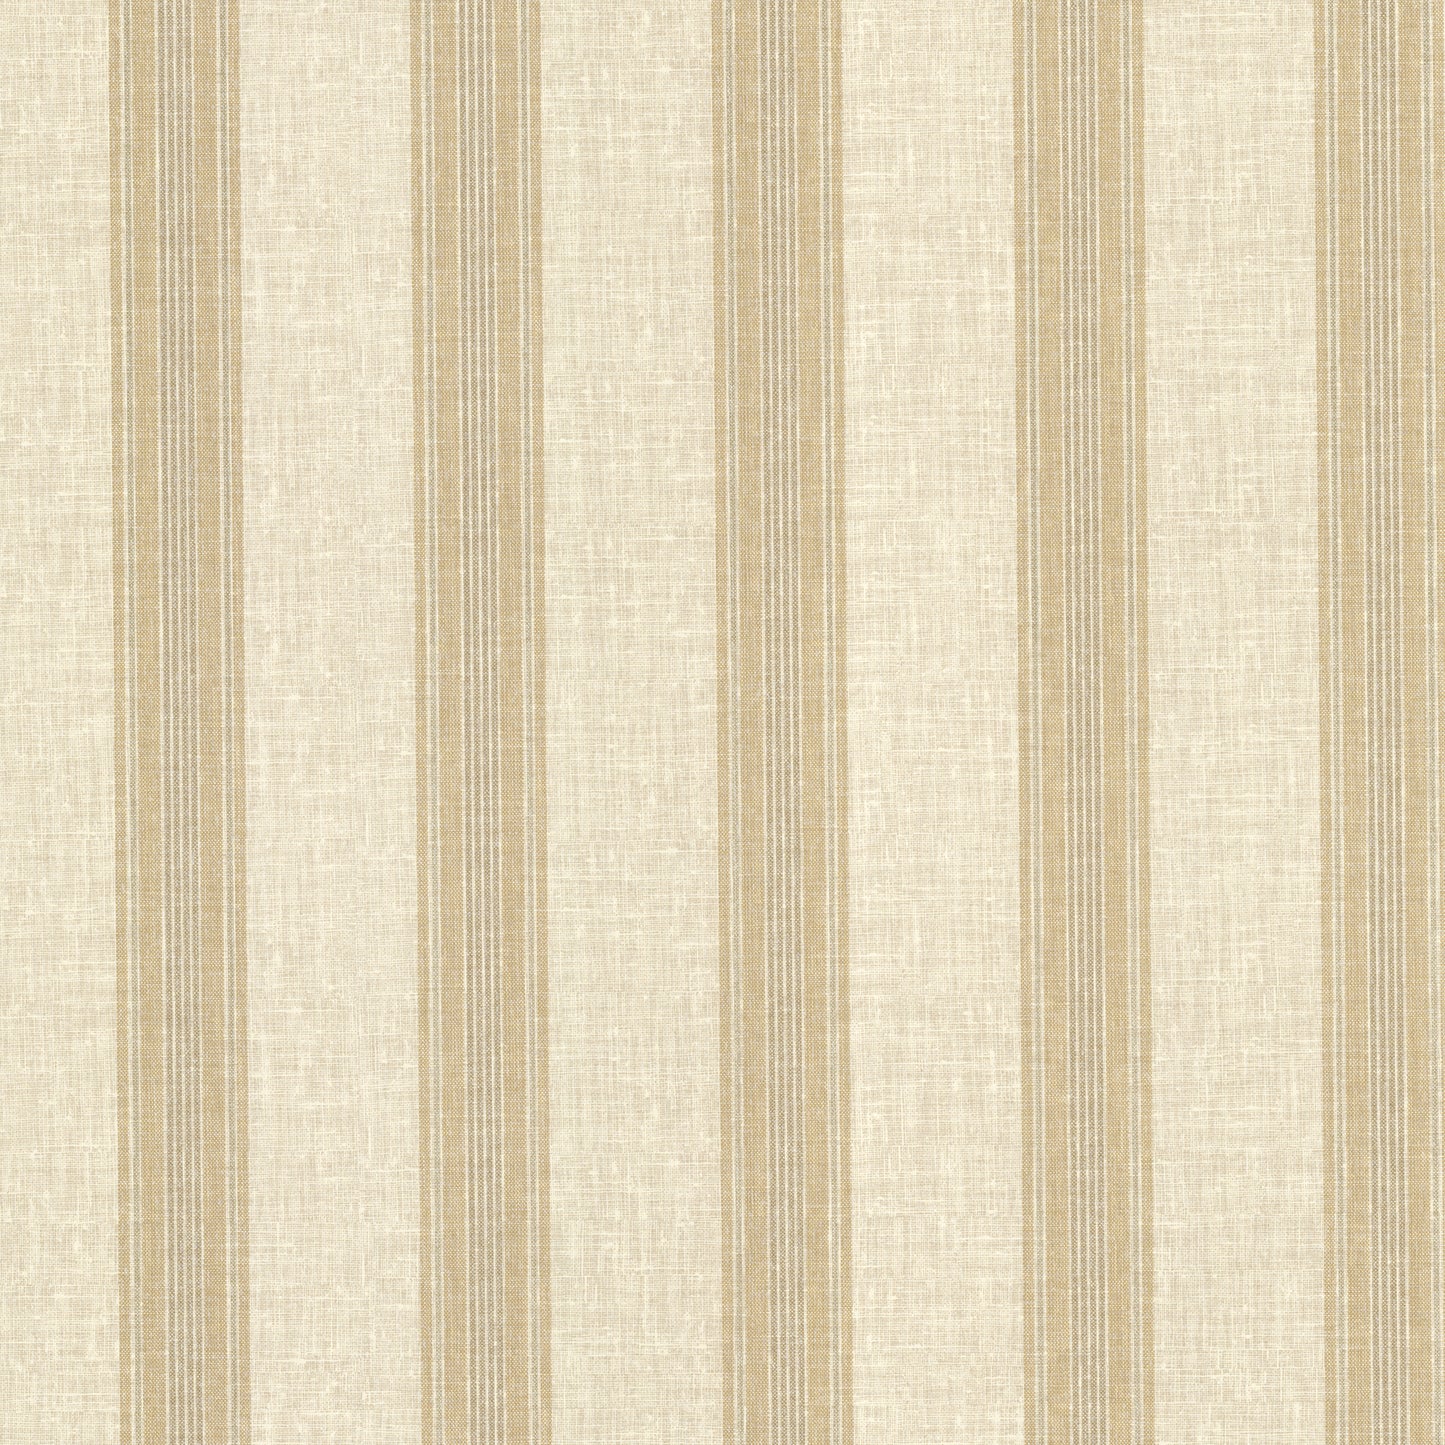 View 2718-66836 Texture Trends II Lineage Brewster Wallpaper